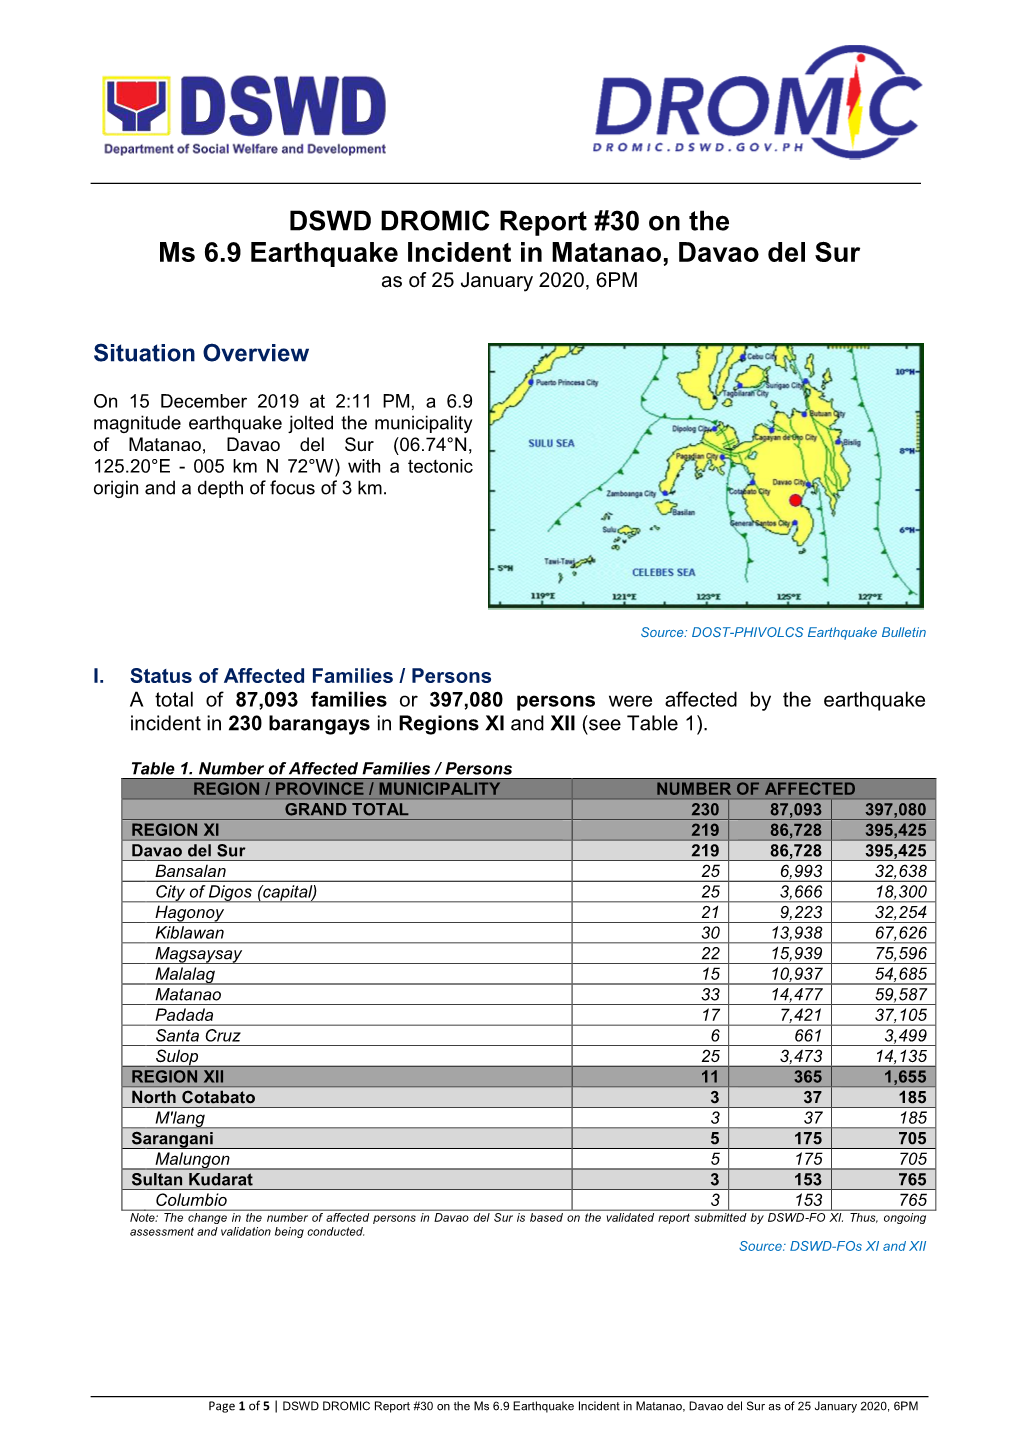 DSWD DROMIC Report #30 on the Ms 6.9 Earthquake Incident in Matanao, Davao Del Sur As of 25 January 2020, 6PM